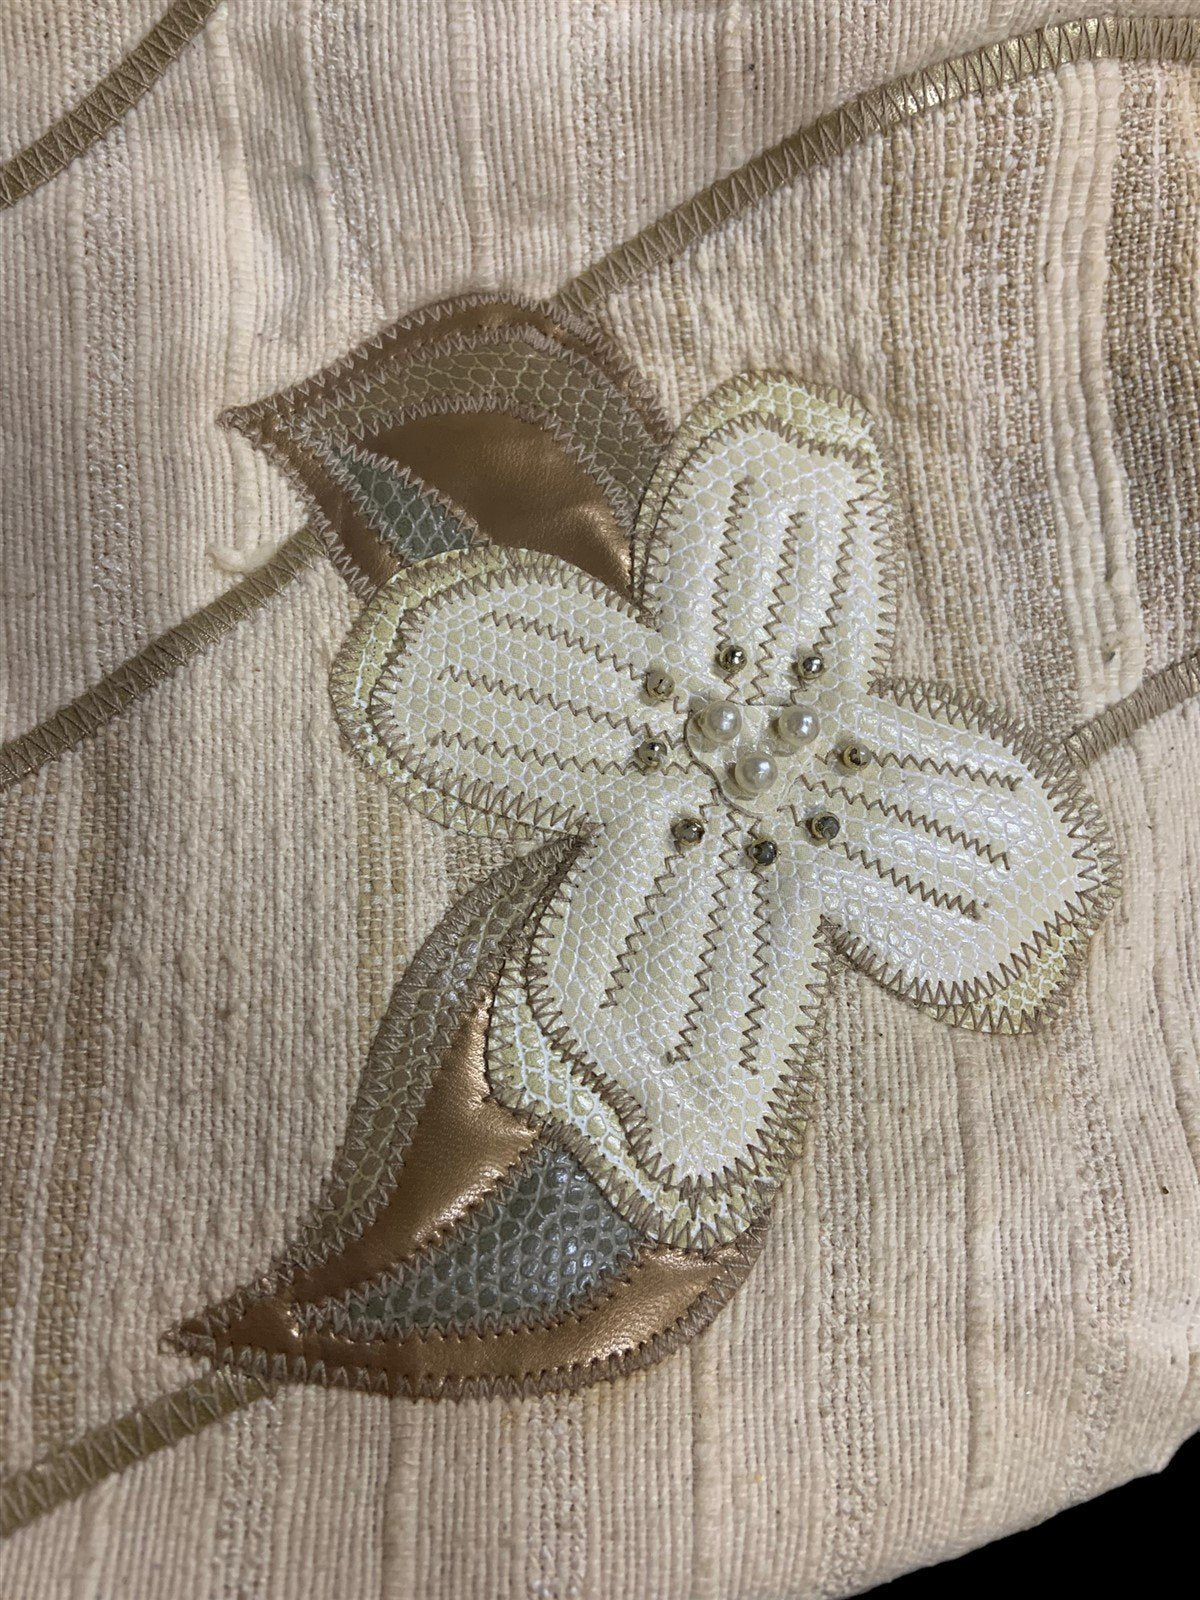 Carpetbags of America Purse White and Gold Vintage Bag Beaded Flower